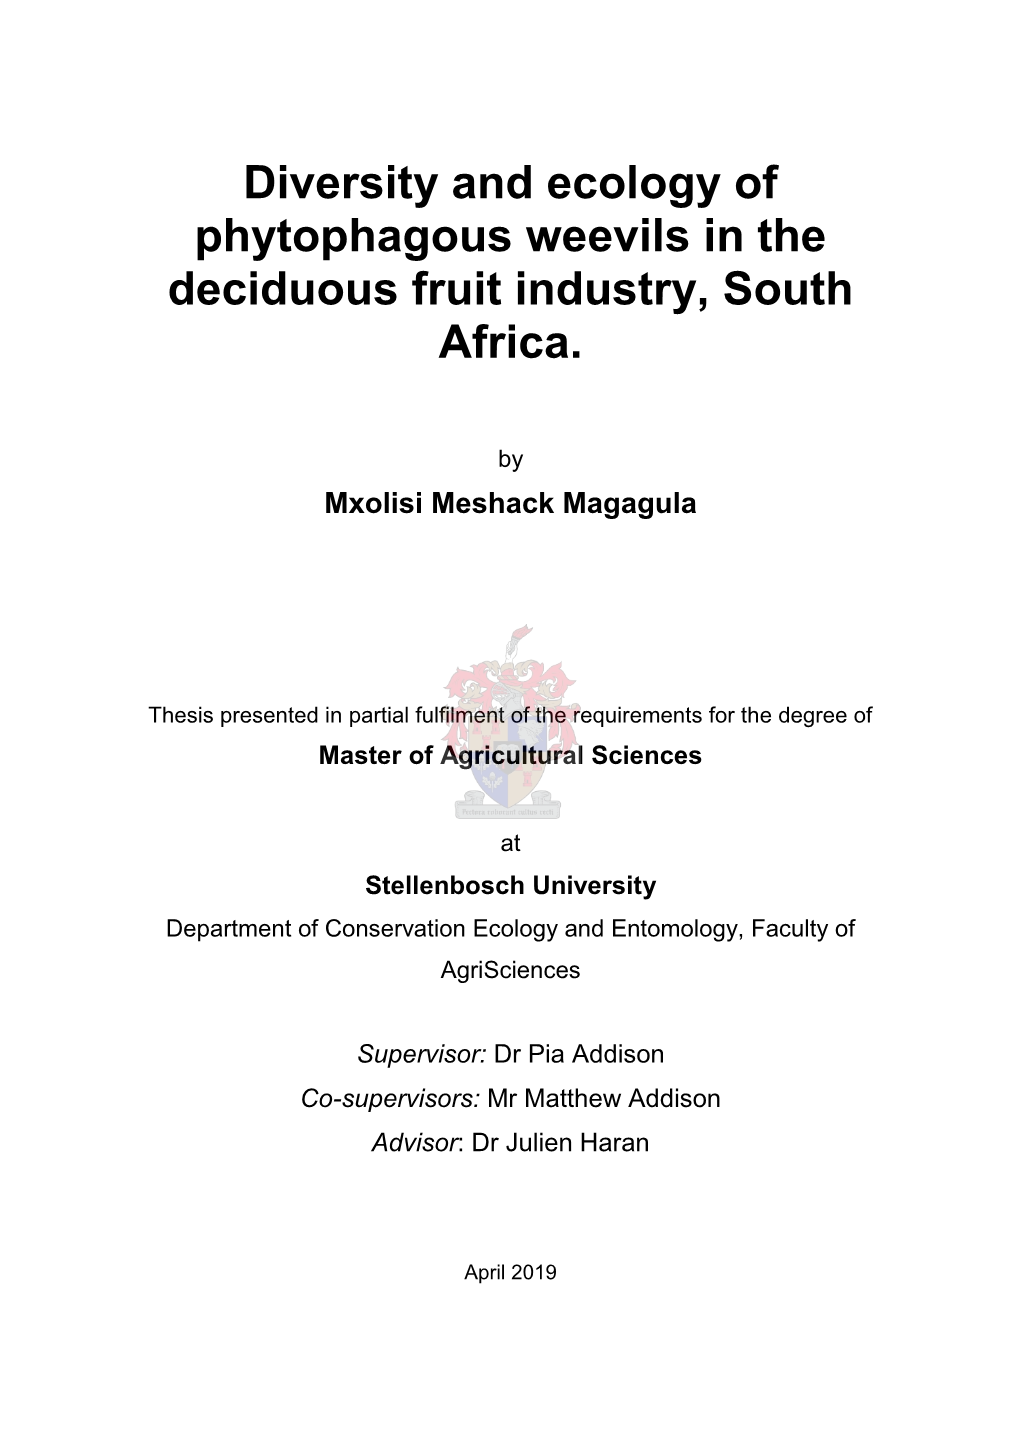 Diversity and Ecology of Phytophagous Weevils in the Deciduous Fruit Industry, South Africa